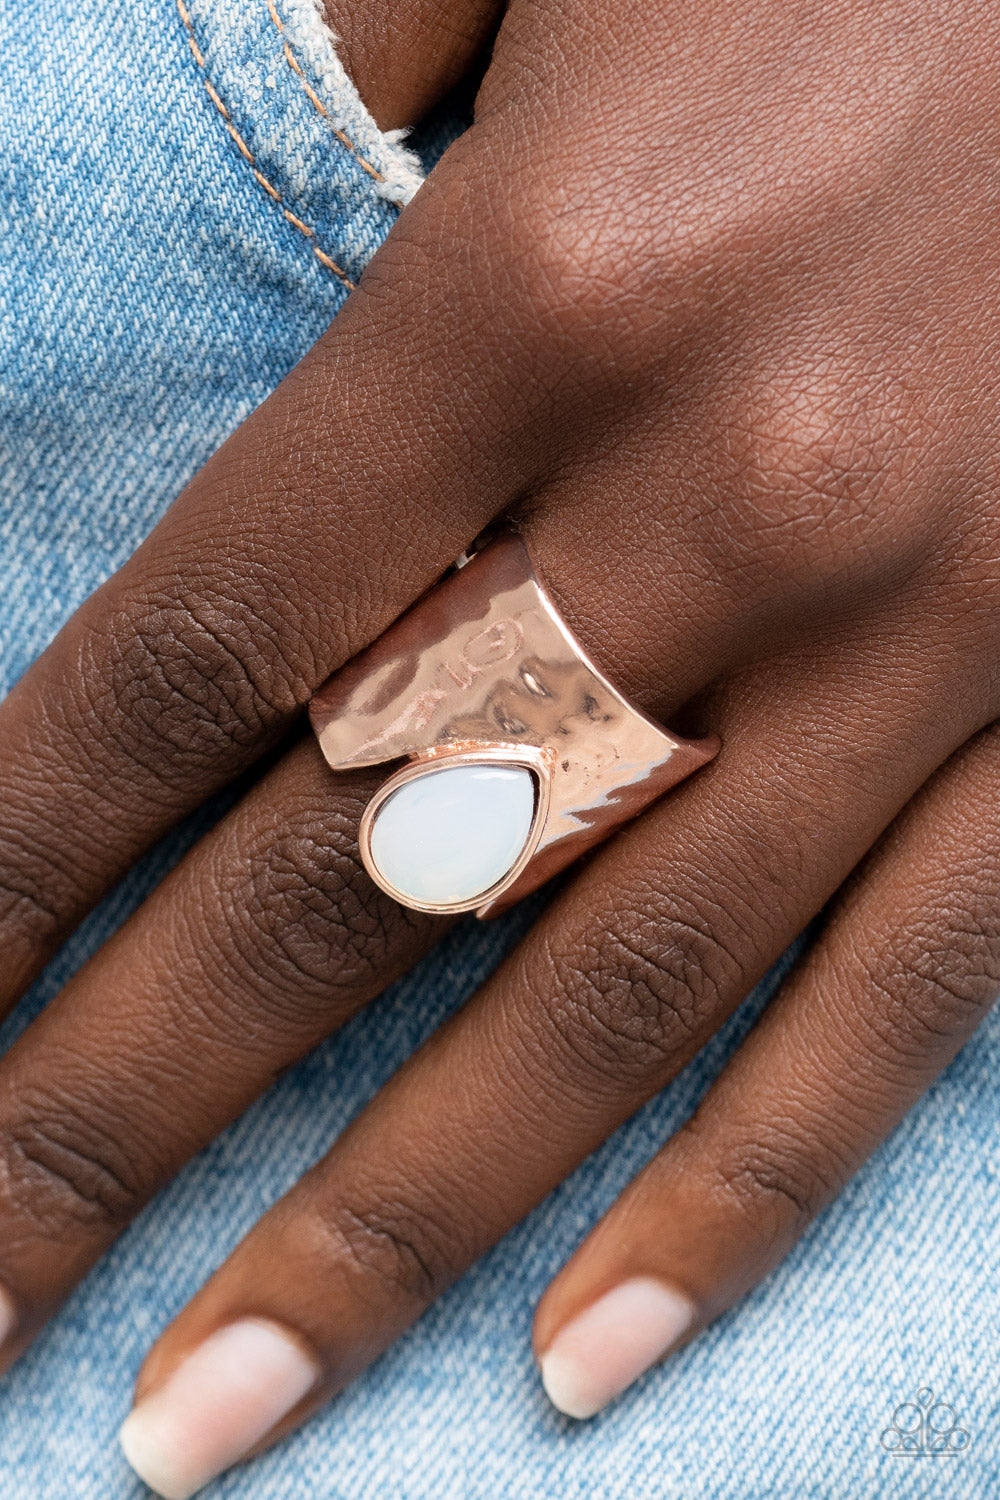 Paparazzi Accessories: Optimistically Oracle - Rose Gold Ring